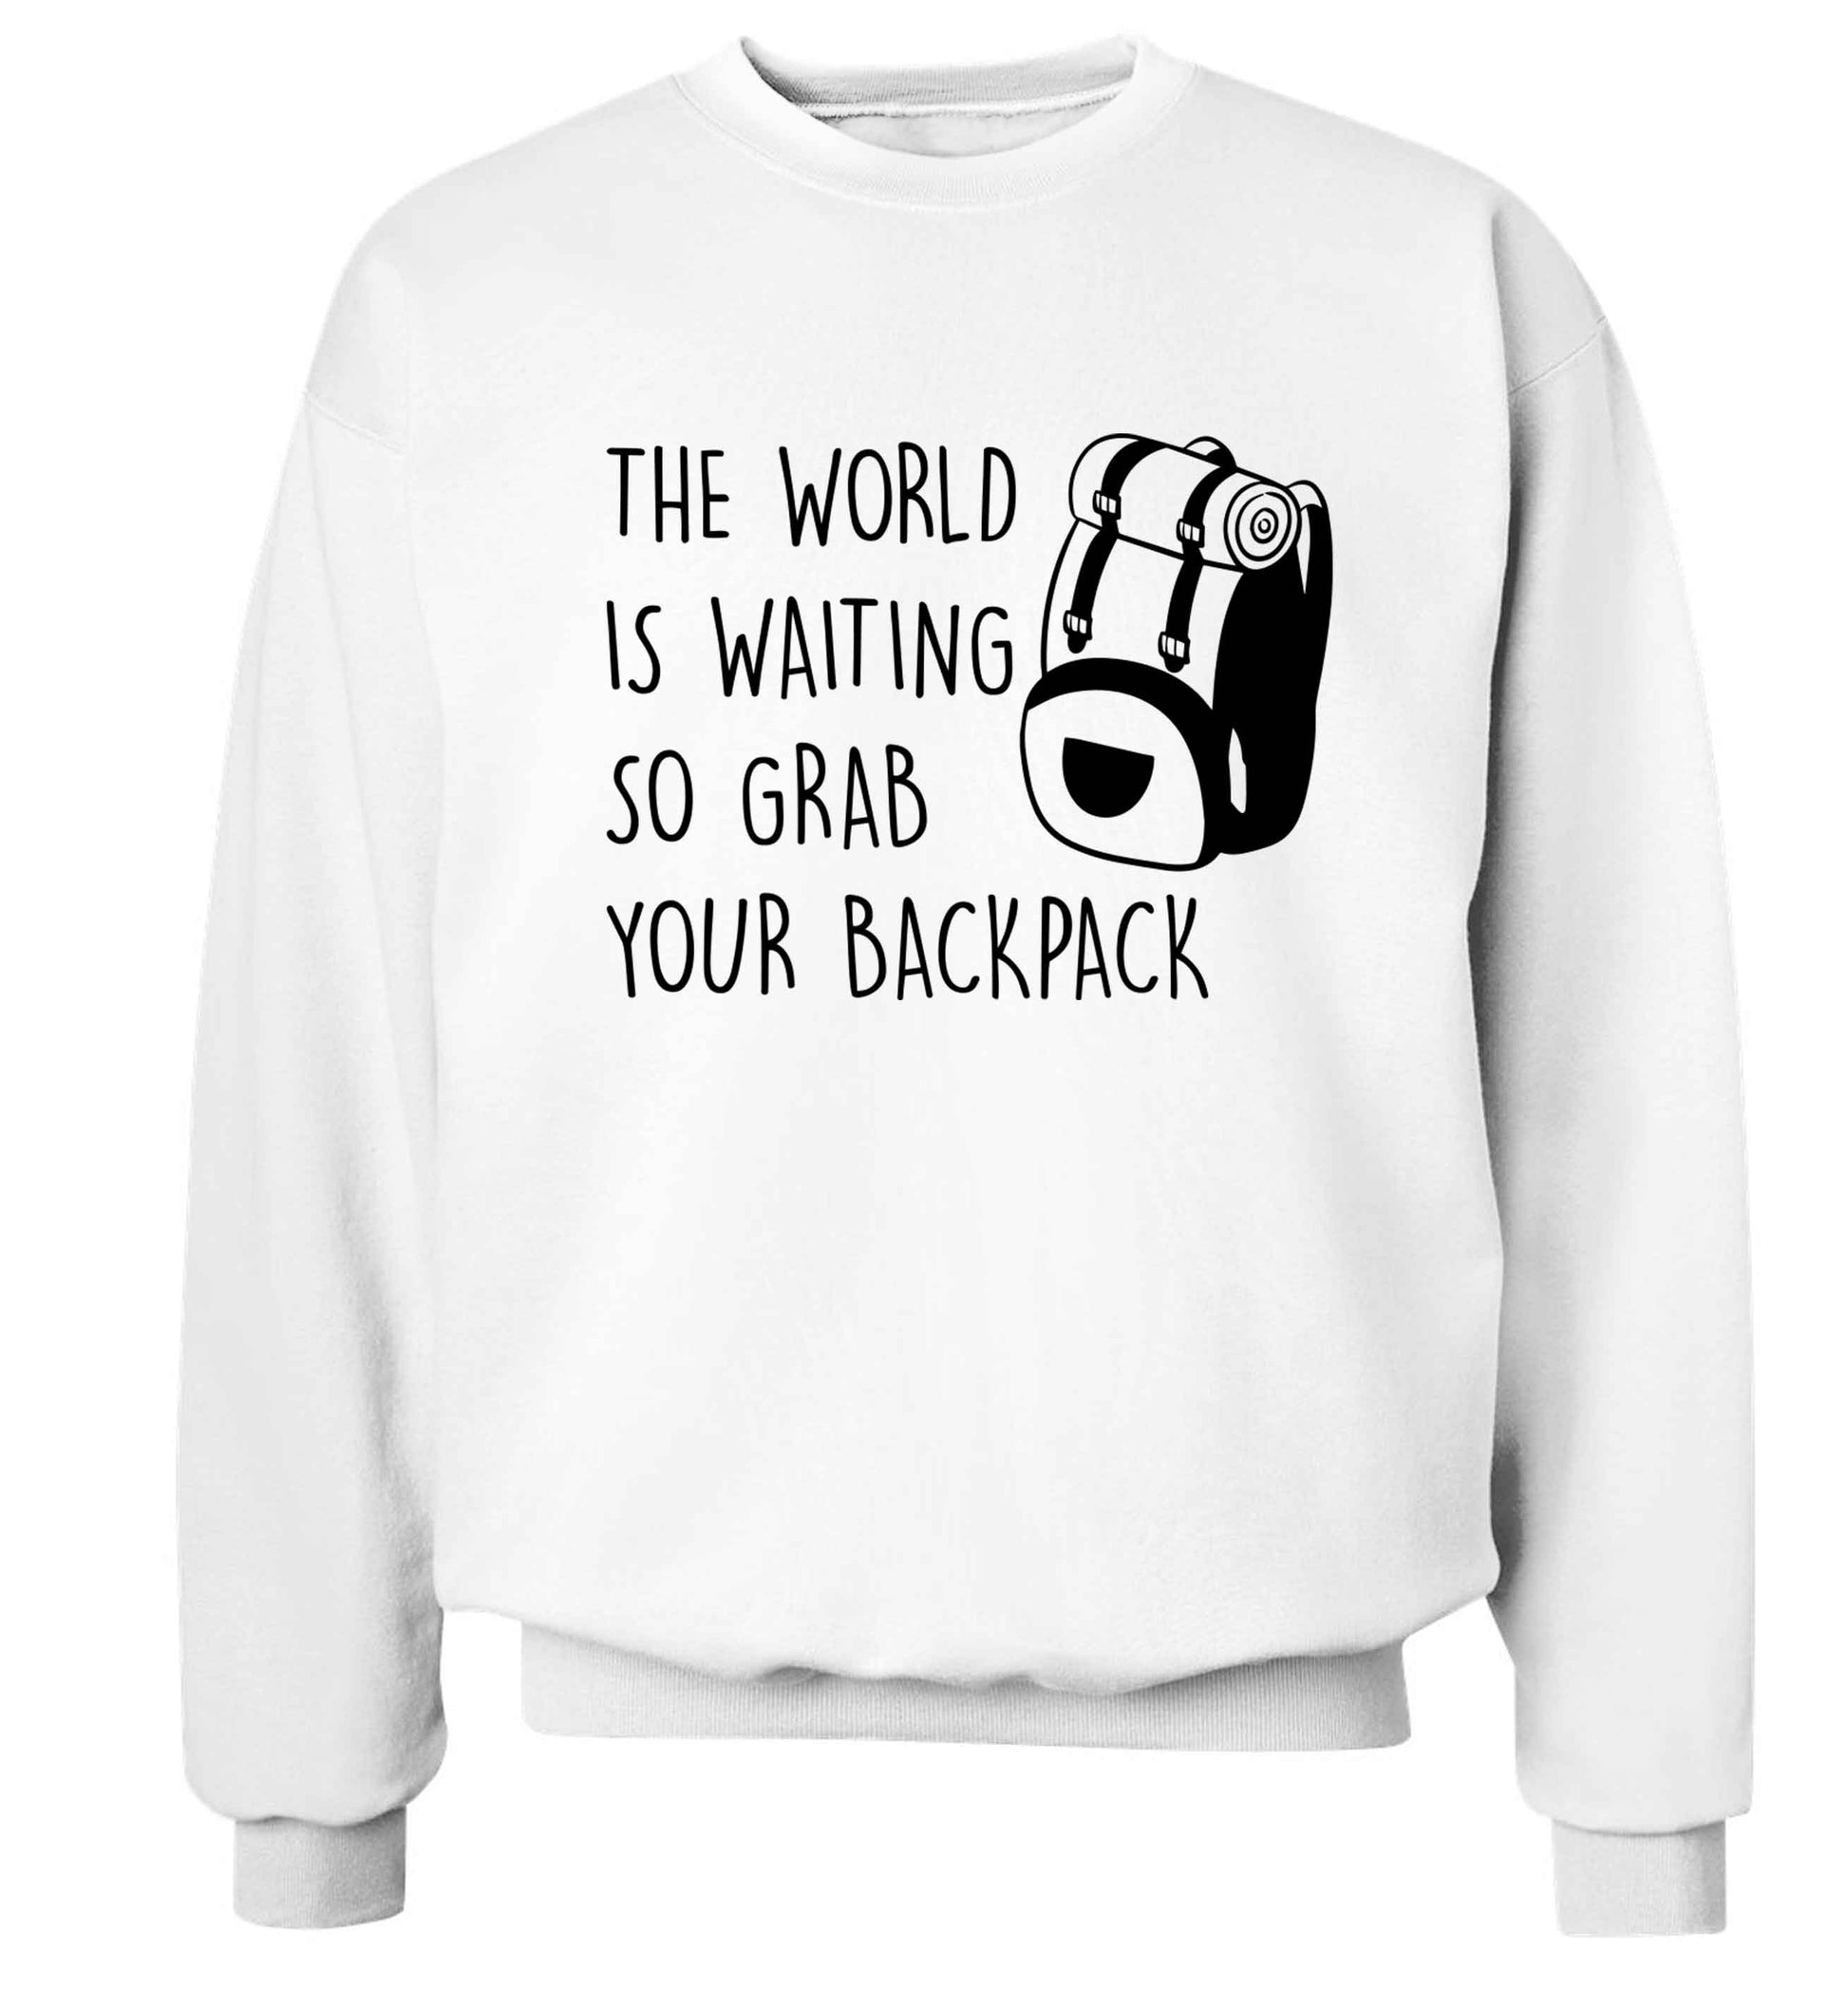 The world is waiting so grab your backpack Adult's unisex white Sweater 2XL